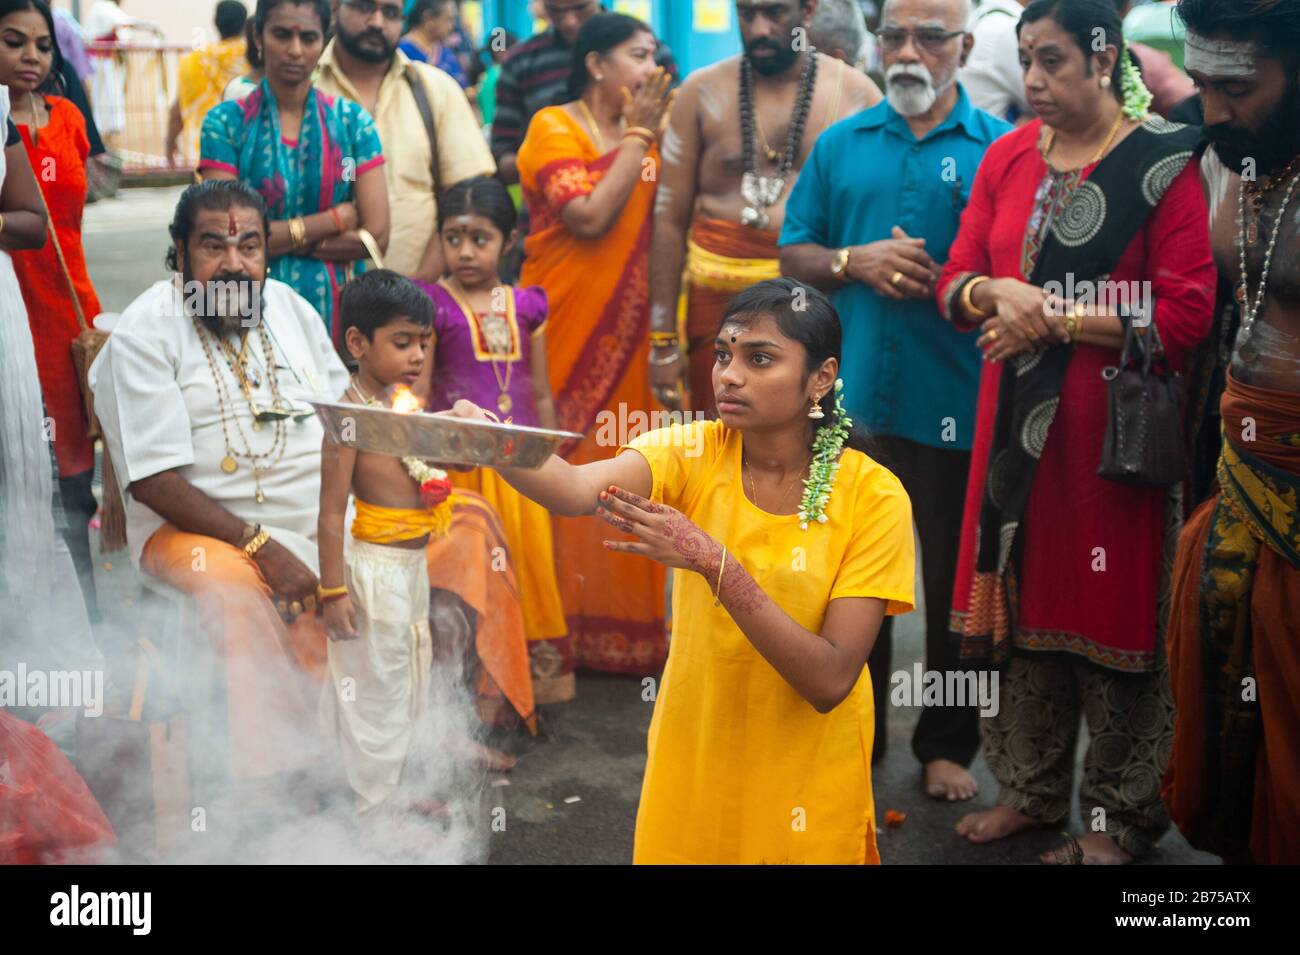 21.01.2019, Singapore, Republic of Singapore, Asia - Faithful Hindus are preparing in the Sri Srinivasa Perumal Temple in Little India for the procession at the Thaipusam festival, which leads to the Sri Thendayuthapani Temple on Tank Road 4 kilometers away. [automated translation] Stock Photo